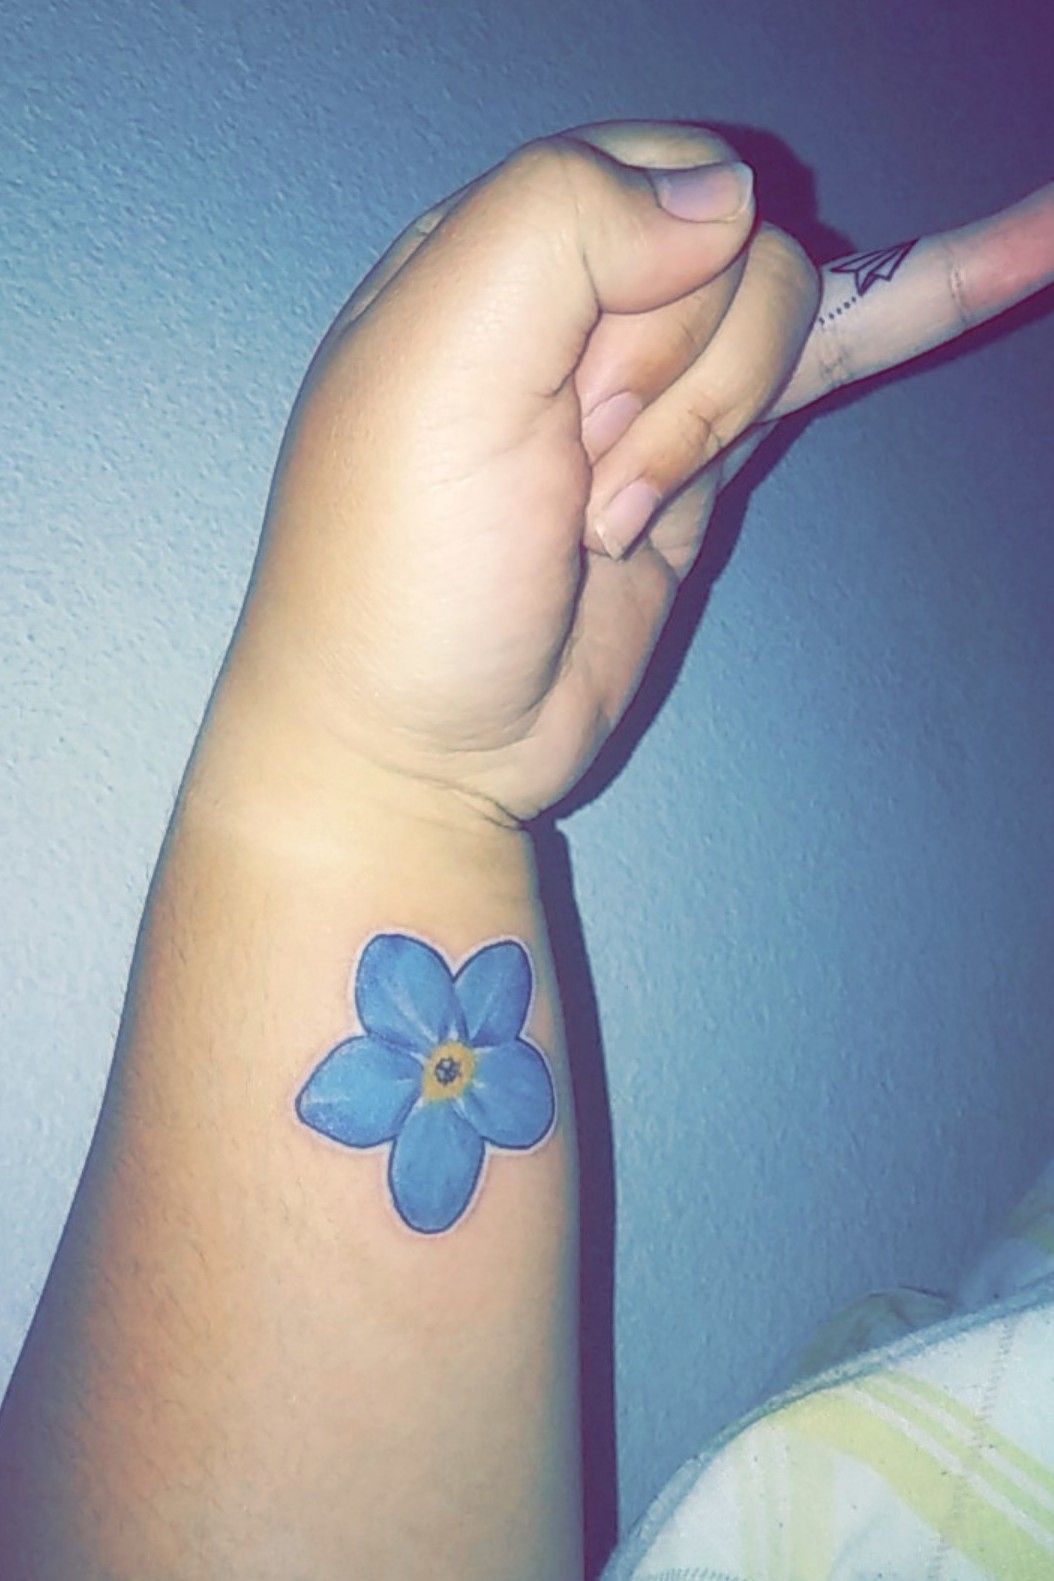 Forget Me Not Tattoo Meaning With 110 Tattoo Designs To Keep Those Memories  Forever